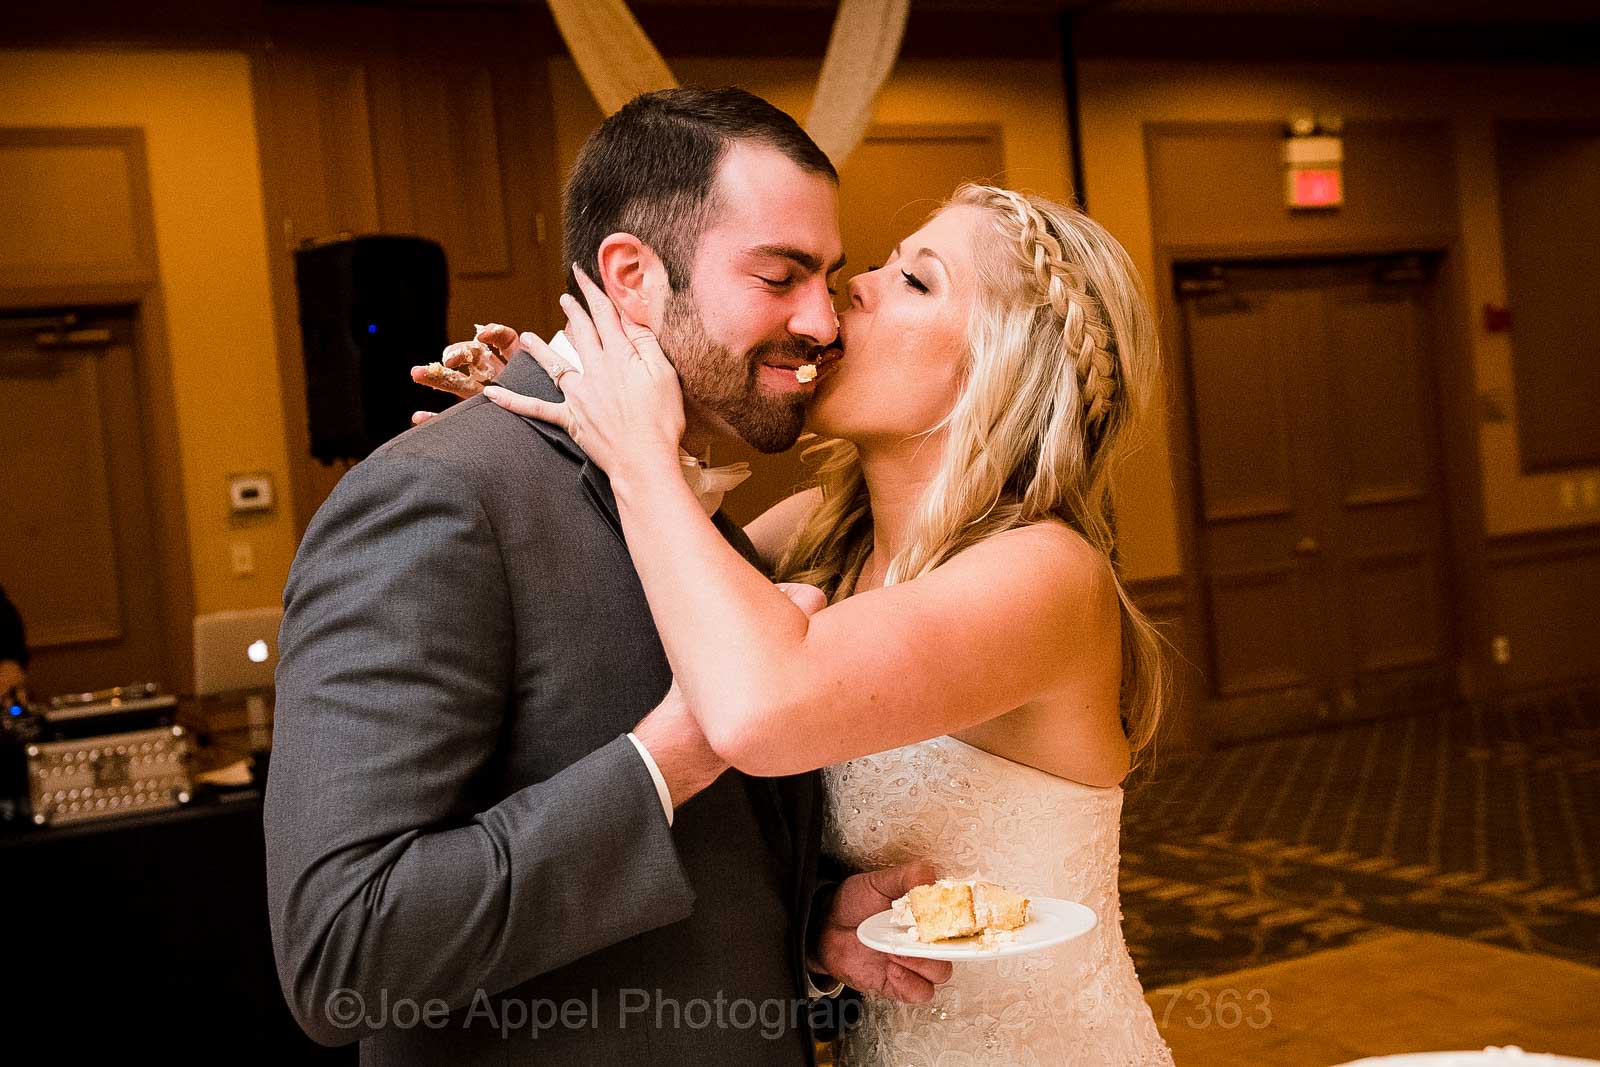 A bride licks her groom's face after smashing cake into it during their Embassy Suites Pittsburgh wedding.